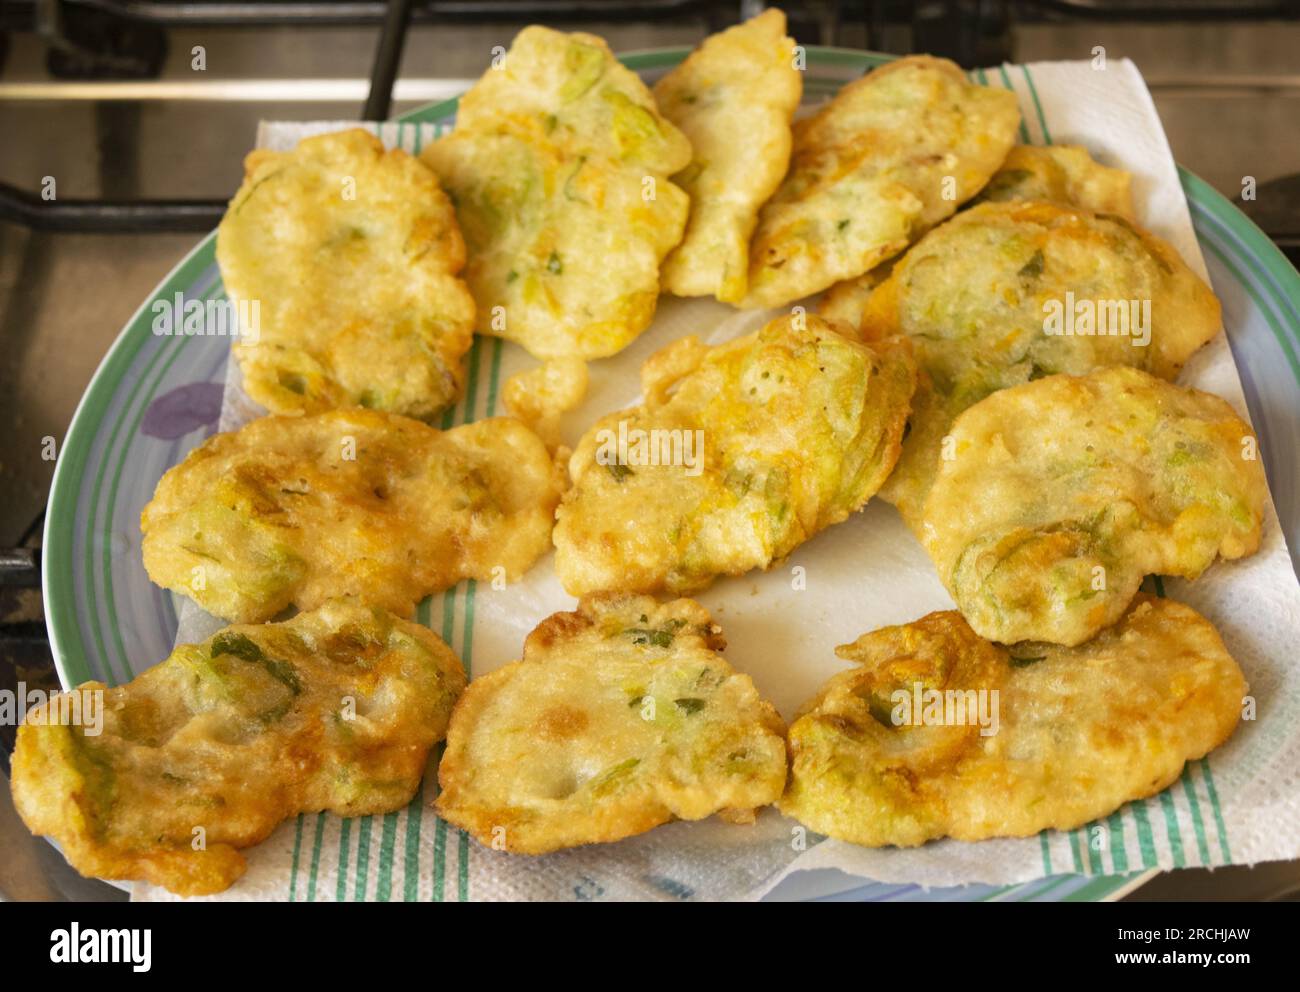 fried zucchini fritters freshly fried in a pan Stock Photo